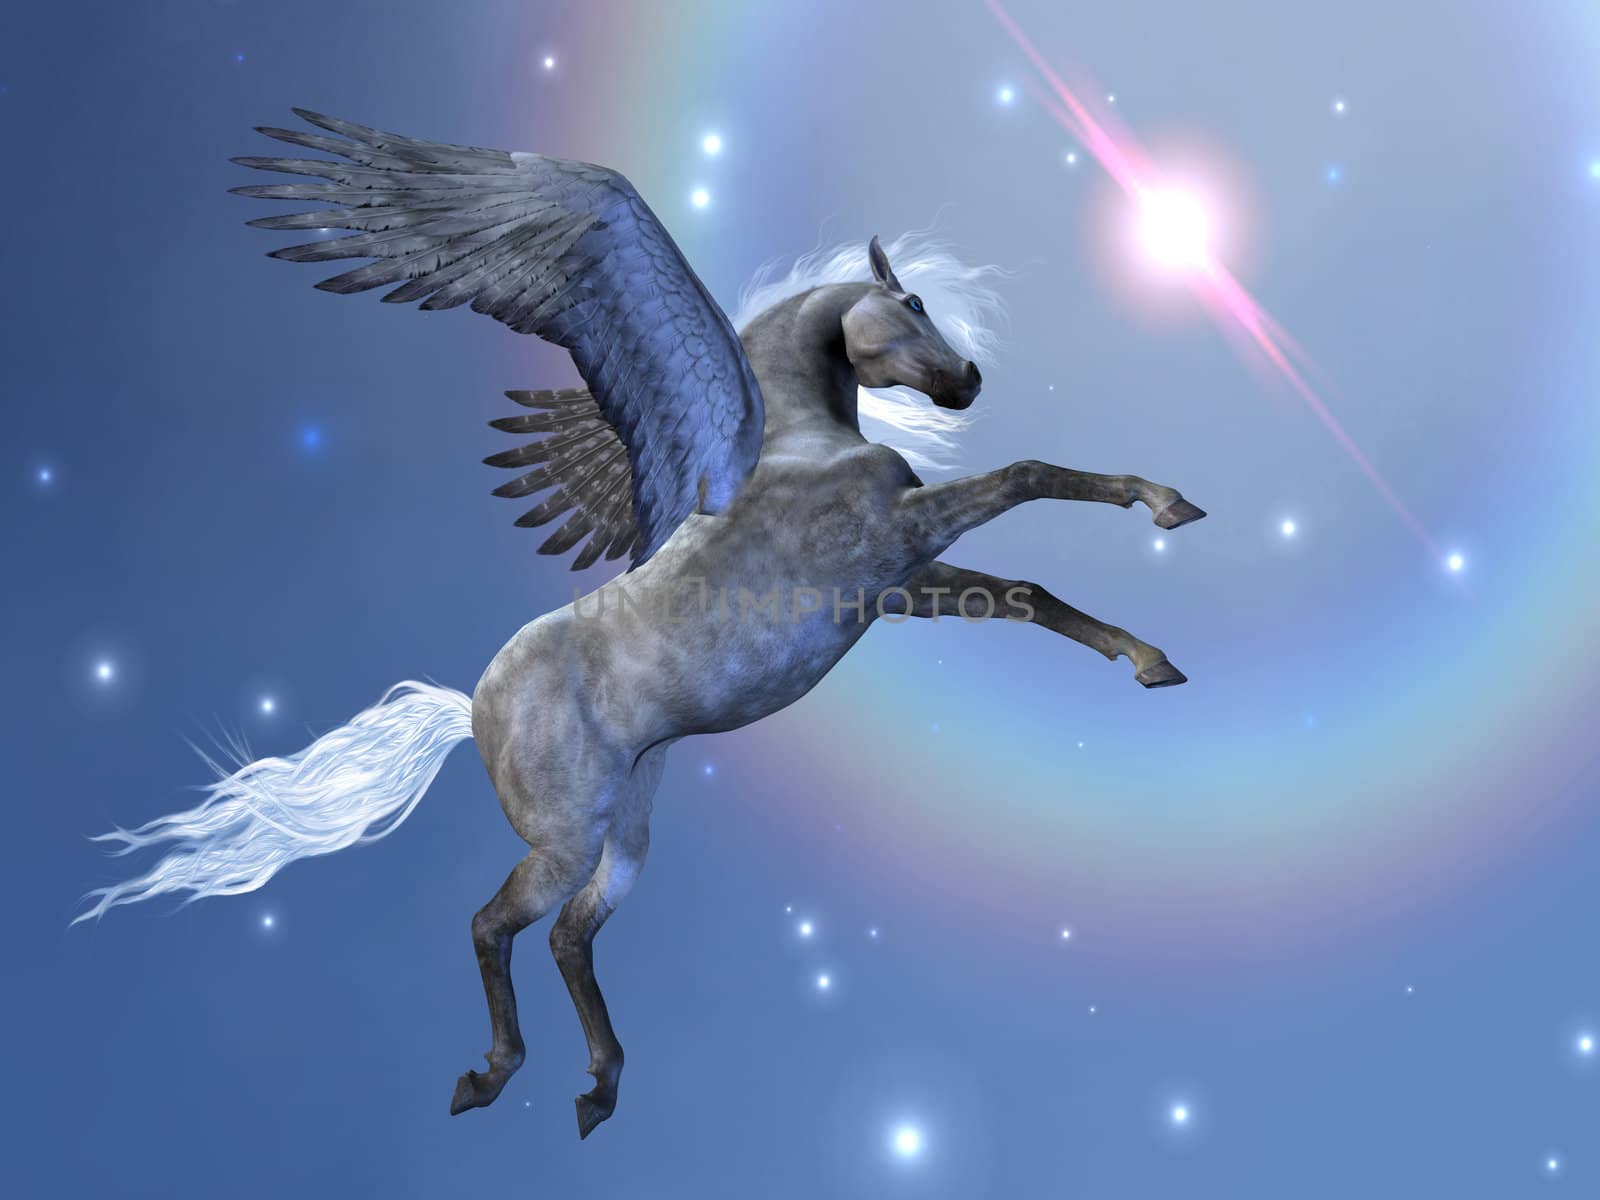 Pegasus flies up among the stars in the sky.